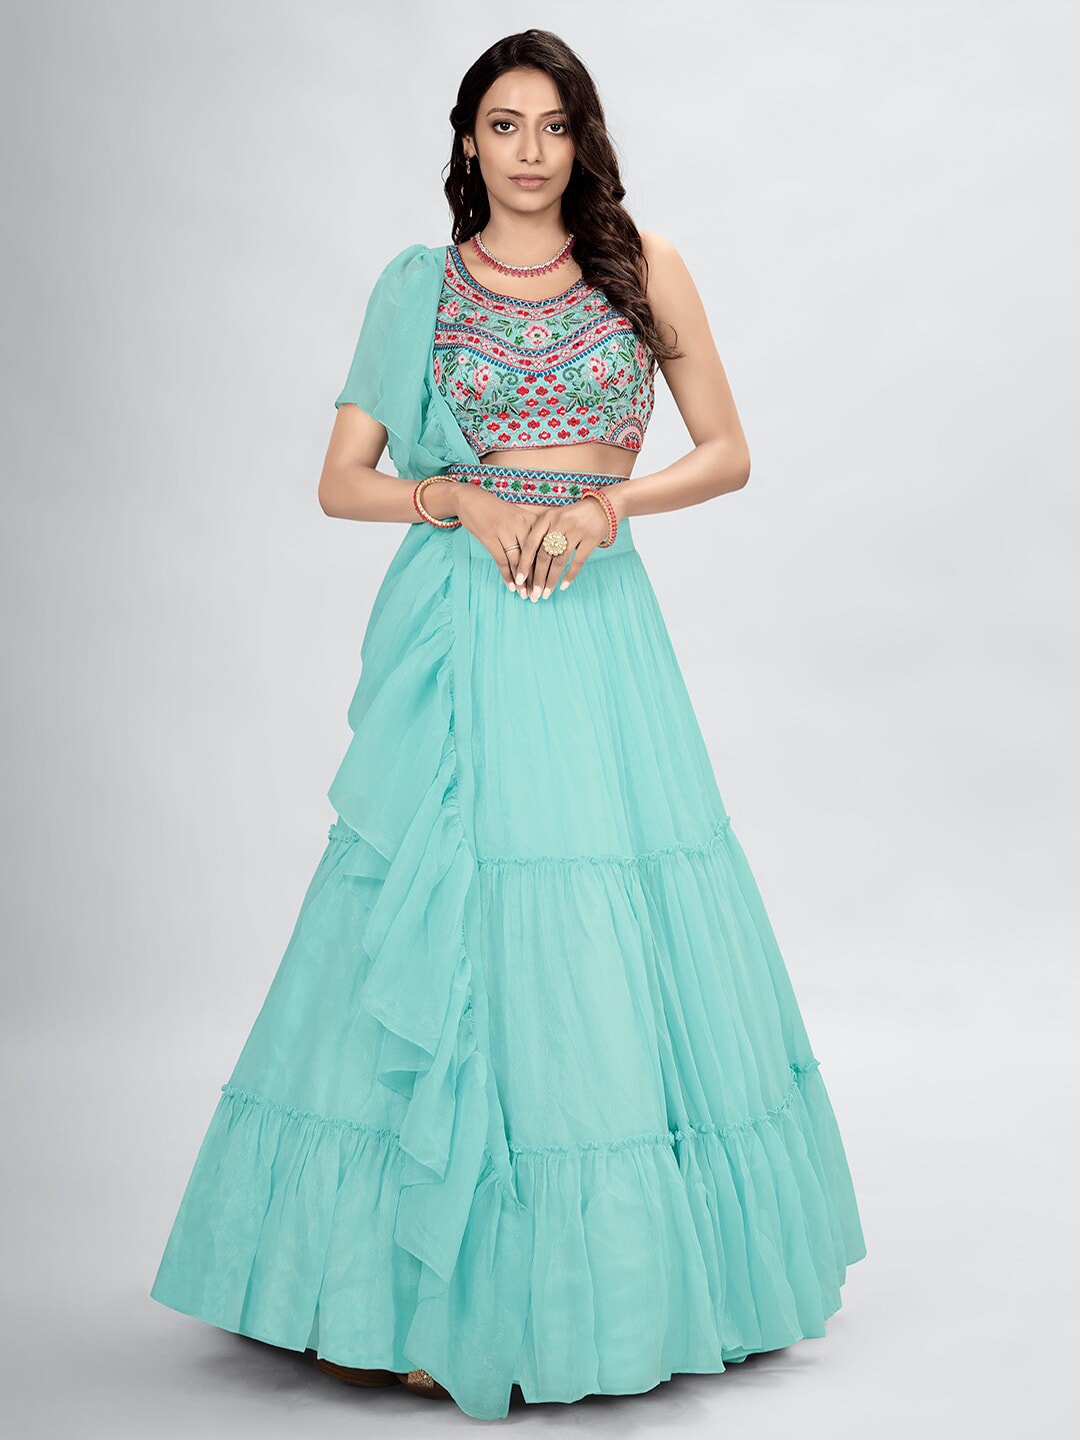 DRESSTIVE Blue & Green Embroidered Mirror Work Semi-Stitched Lehenga & Unstitched Blouse With Dupatta Price in India